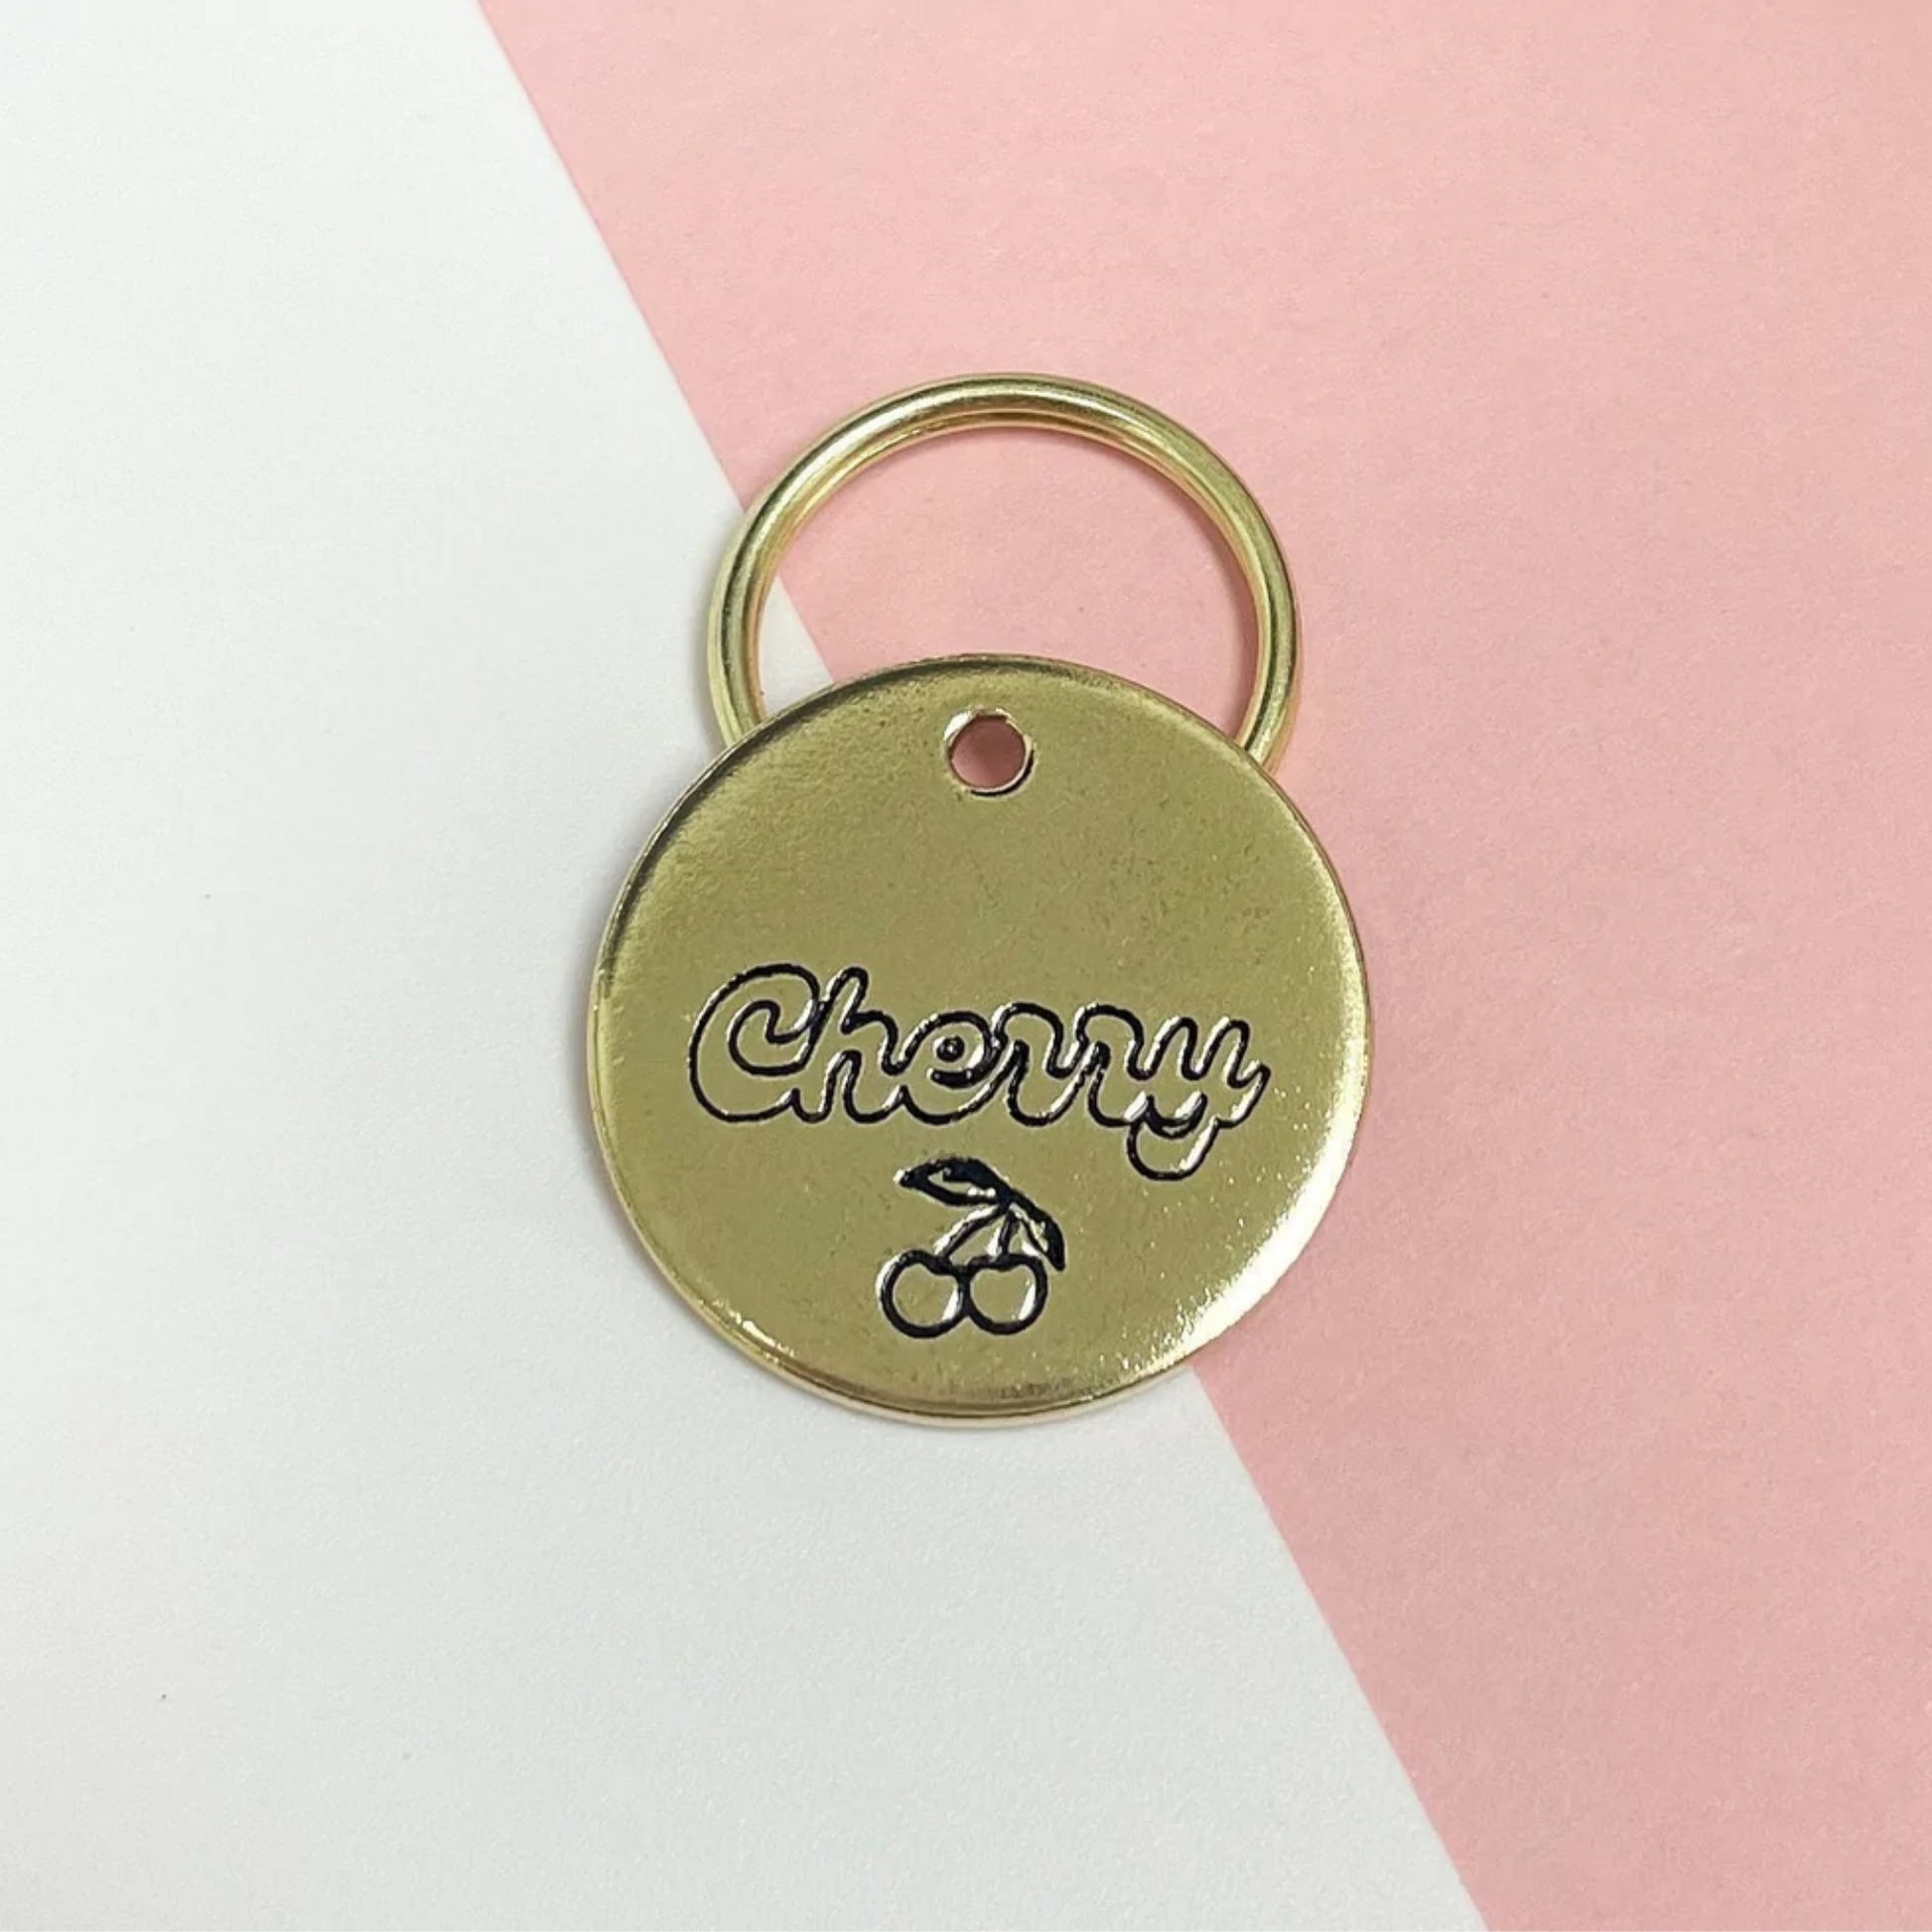 Personalized Dog Tag - Cherry Design Engraved Dog Tag - Cat ID Tag - Dog Collar Tag - Custom Dog Tag - Pet ID Tag - Pet Name Tag - Cherry Dog Tag - Dog Gear - Dog Accessories - Pet Accessories - Fruit Emoji